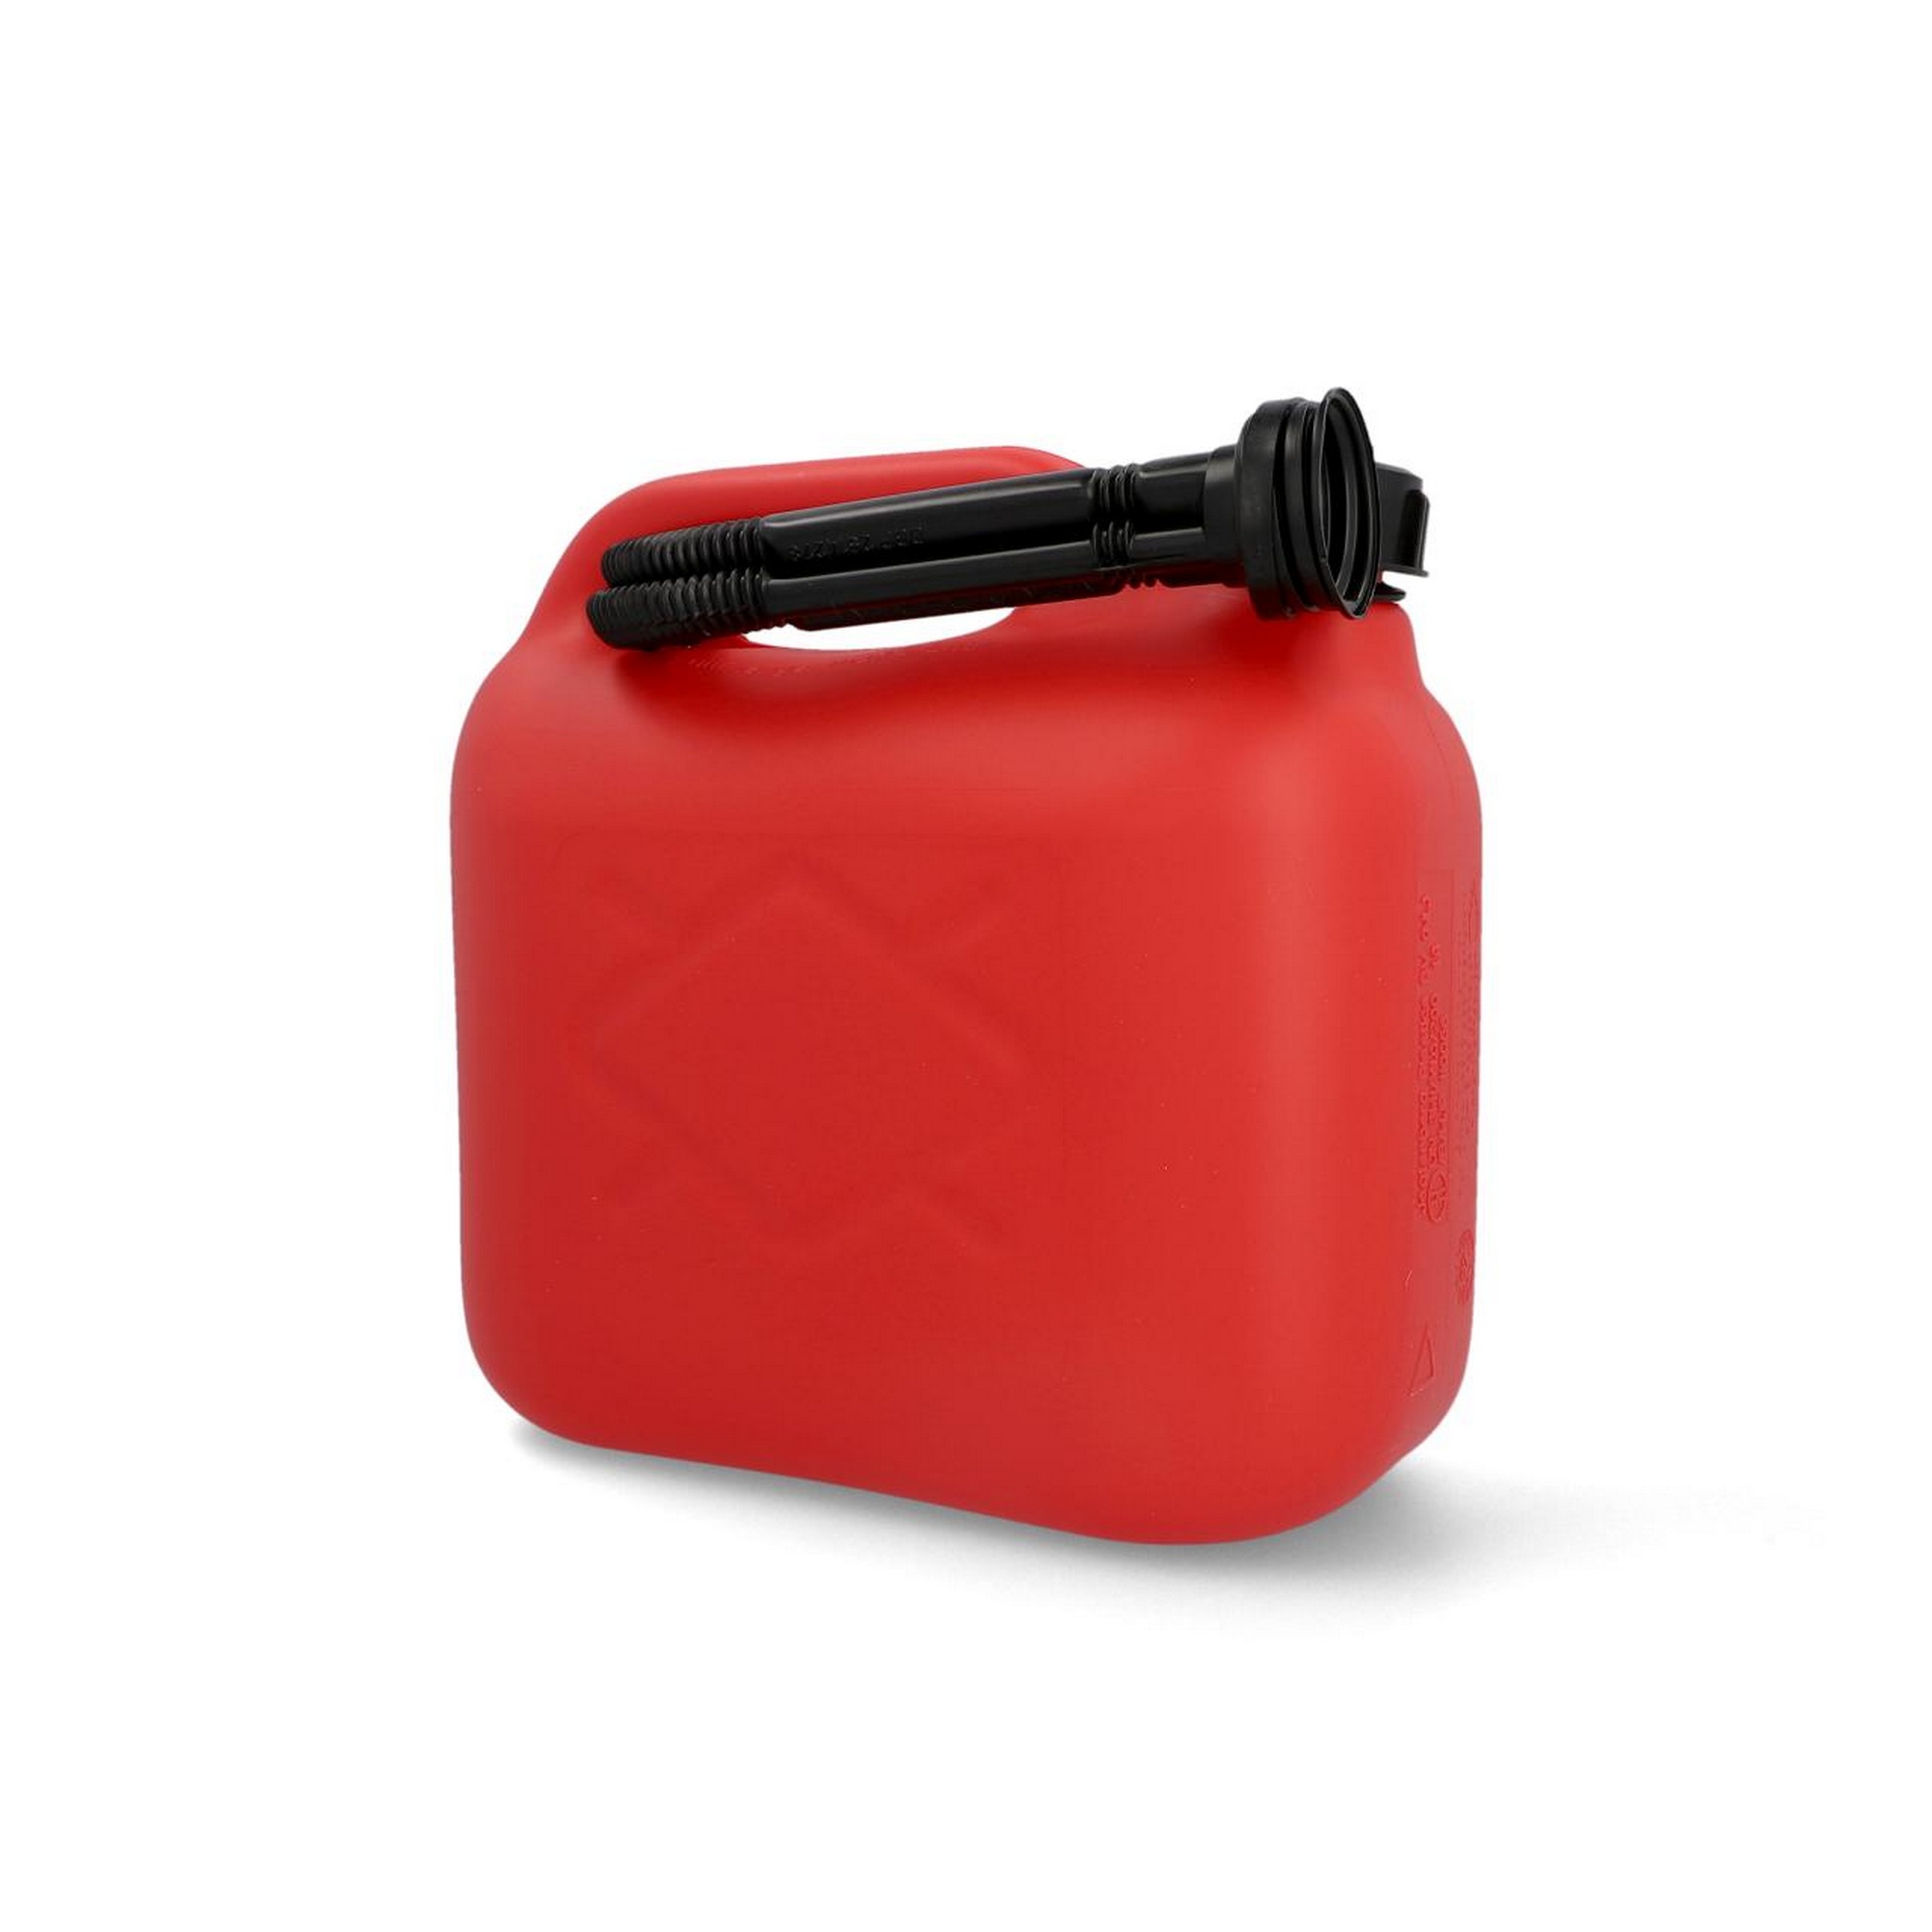 Benzinkanister Kunststoff rot, 5 l + product picture